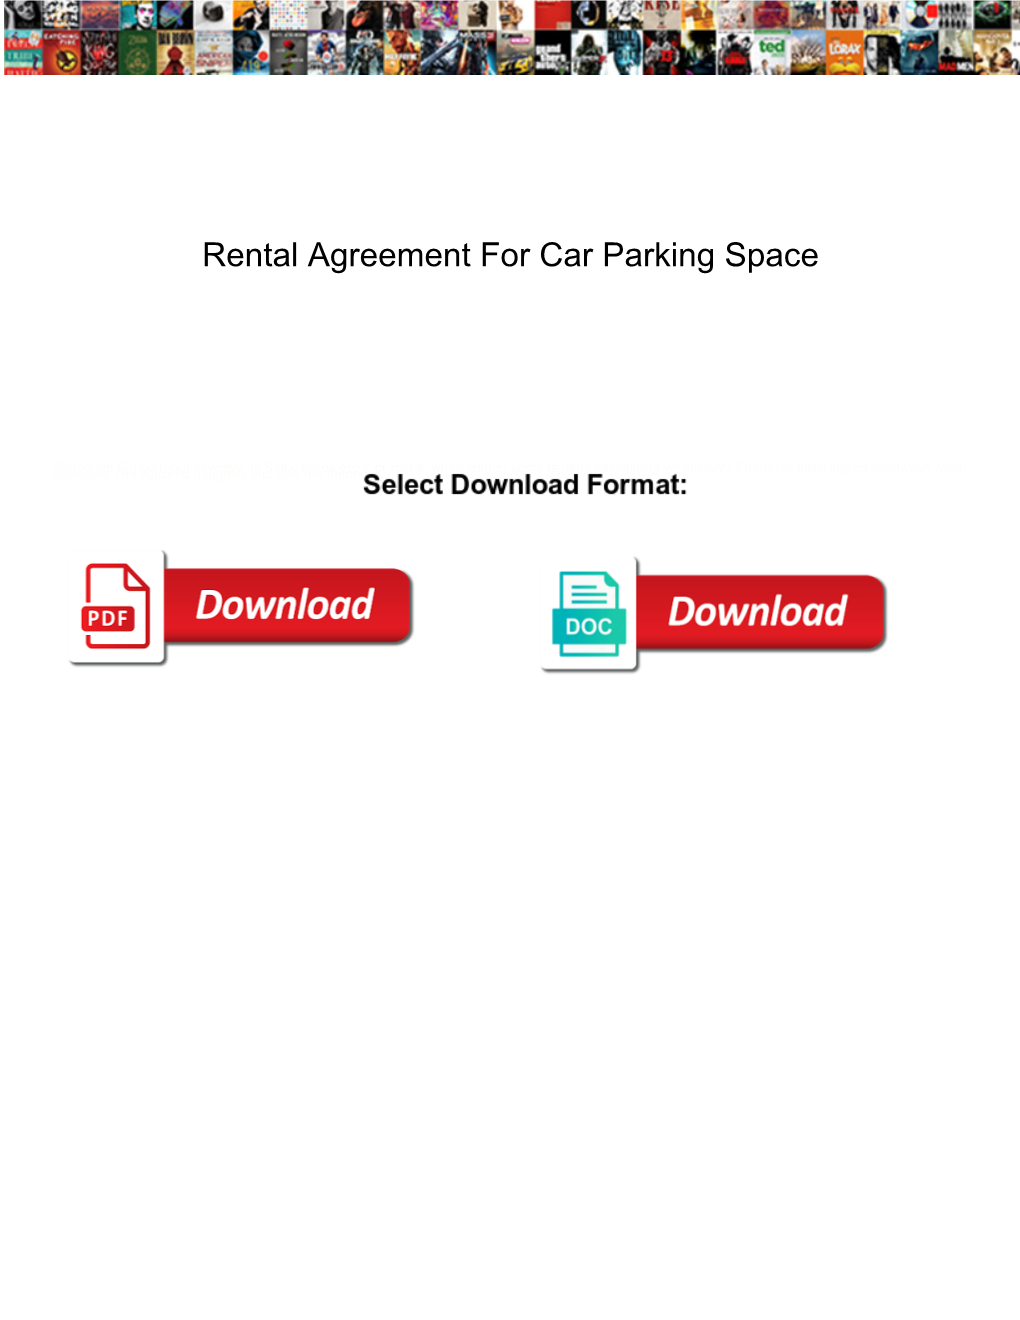 Rental Agreement for Car Parking Space